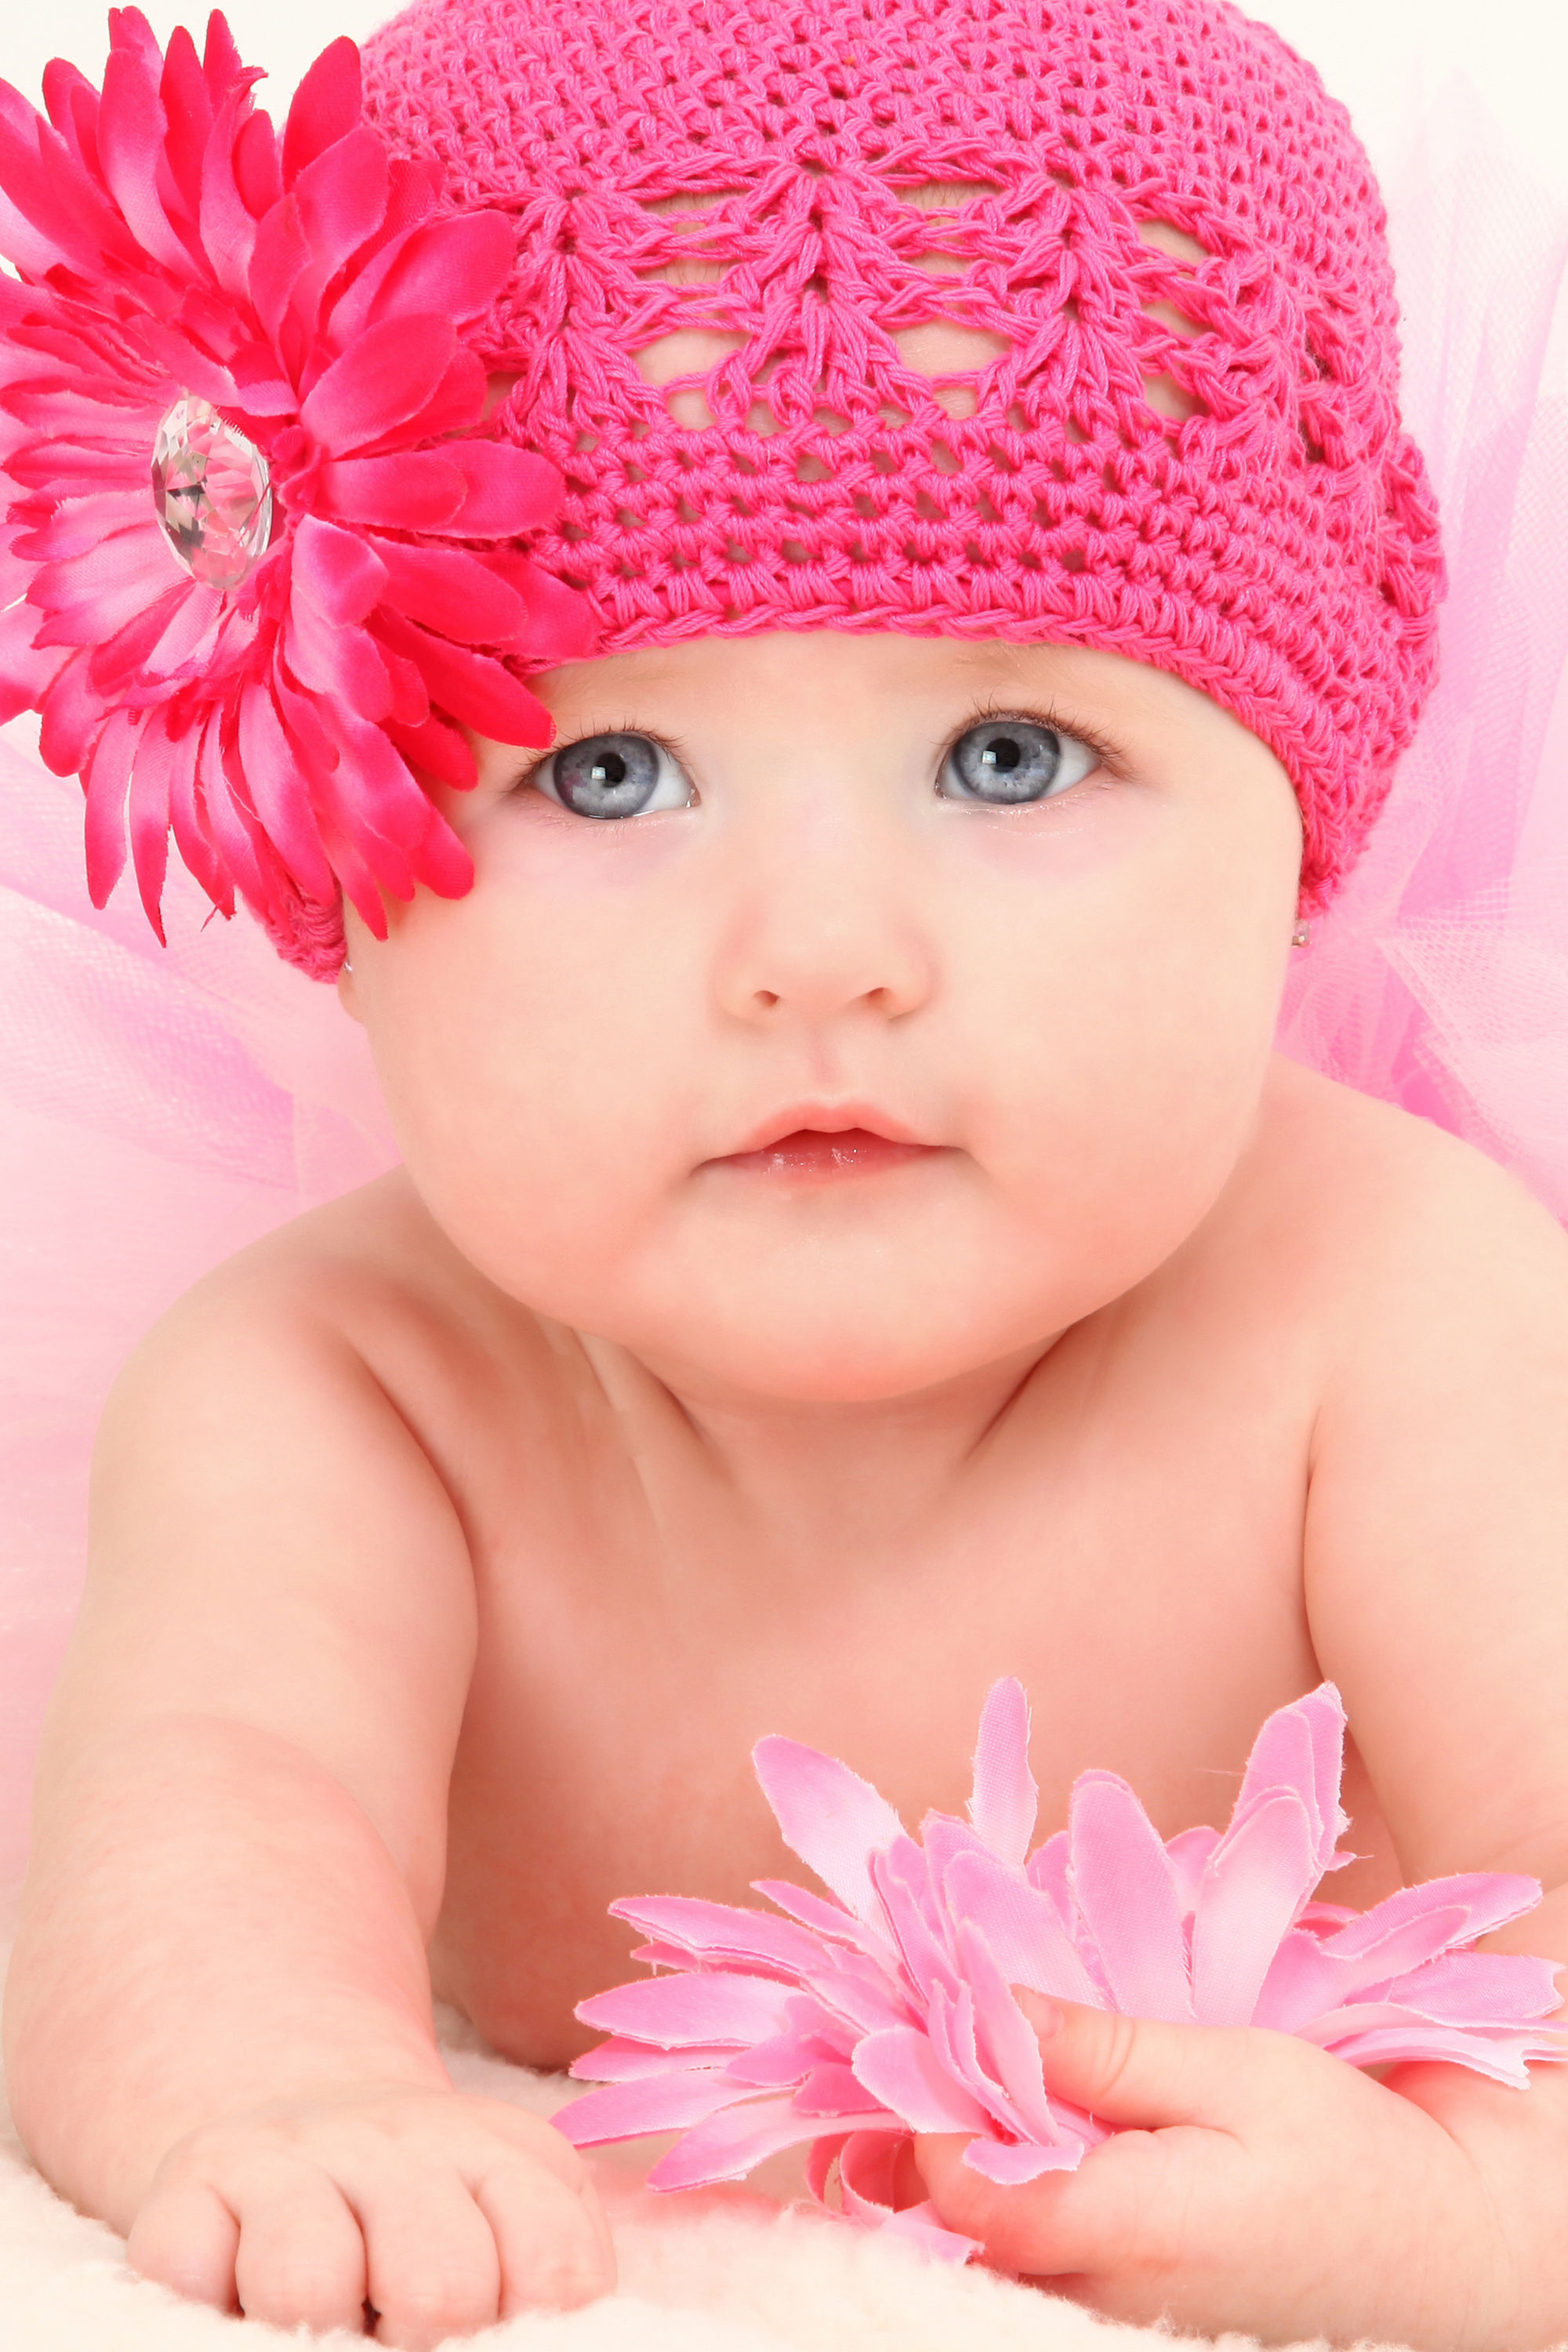 Wallpapers Collection Â«cute Baby Wallpapersâ» Hd Wallpapers - Beautiful Cute  Baby - 2000x3000 Wallpaper 